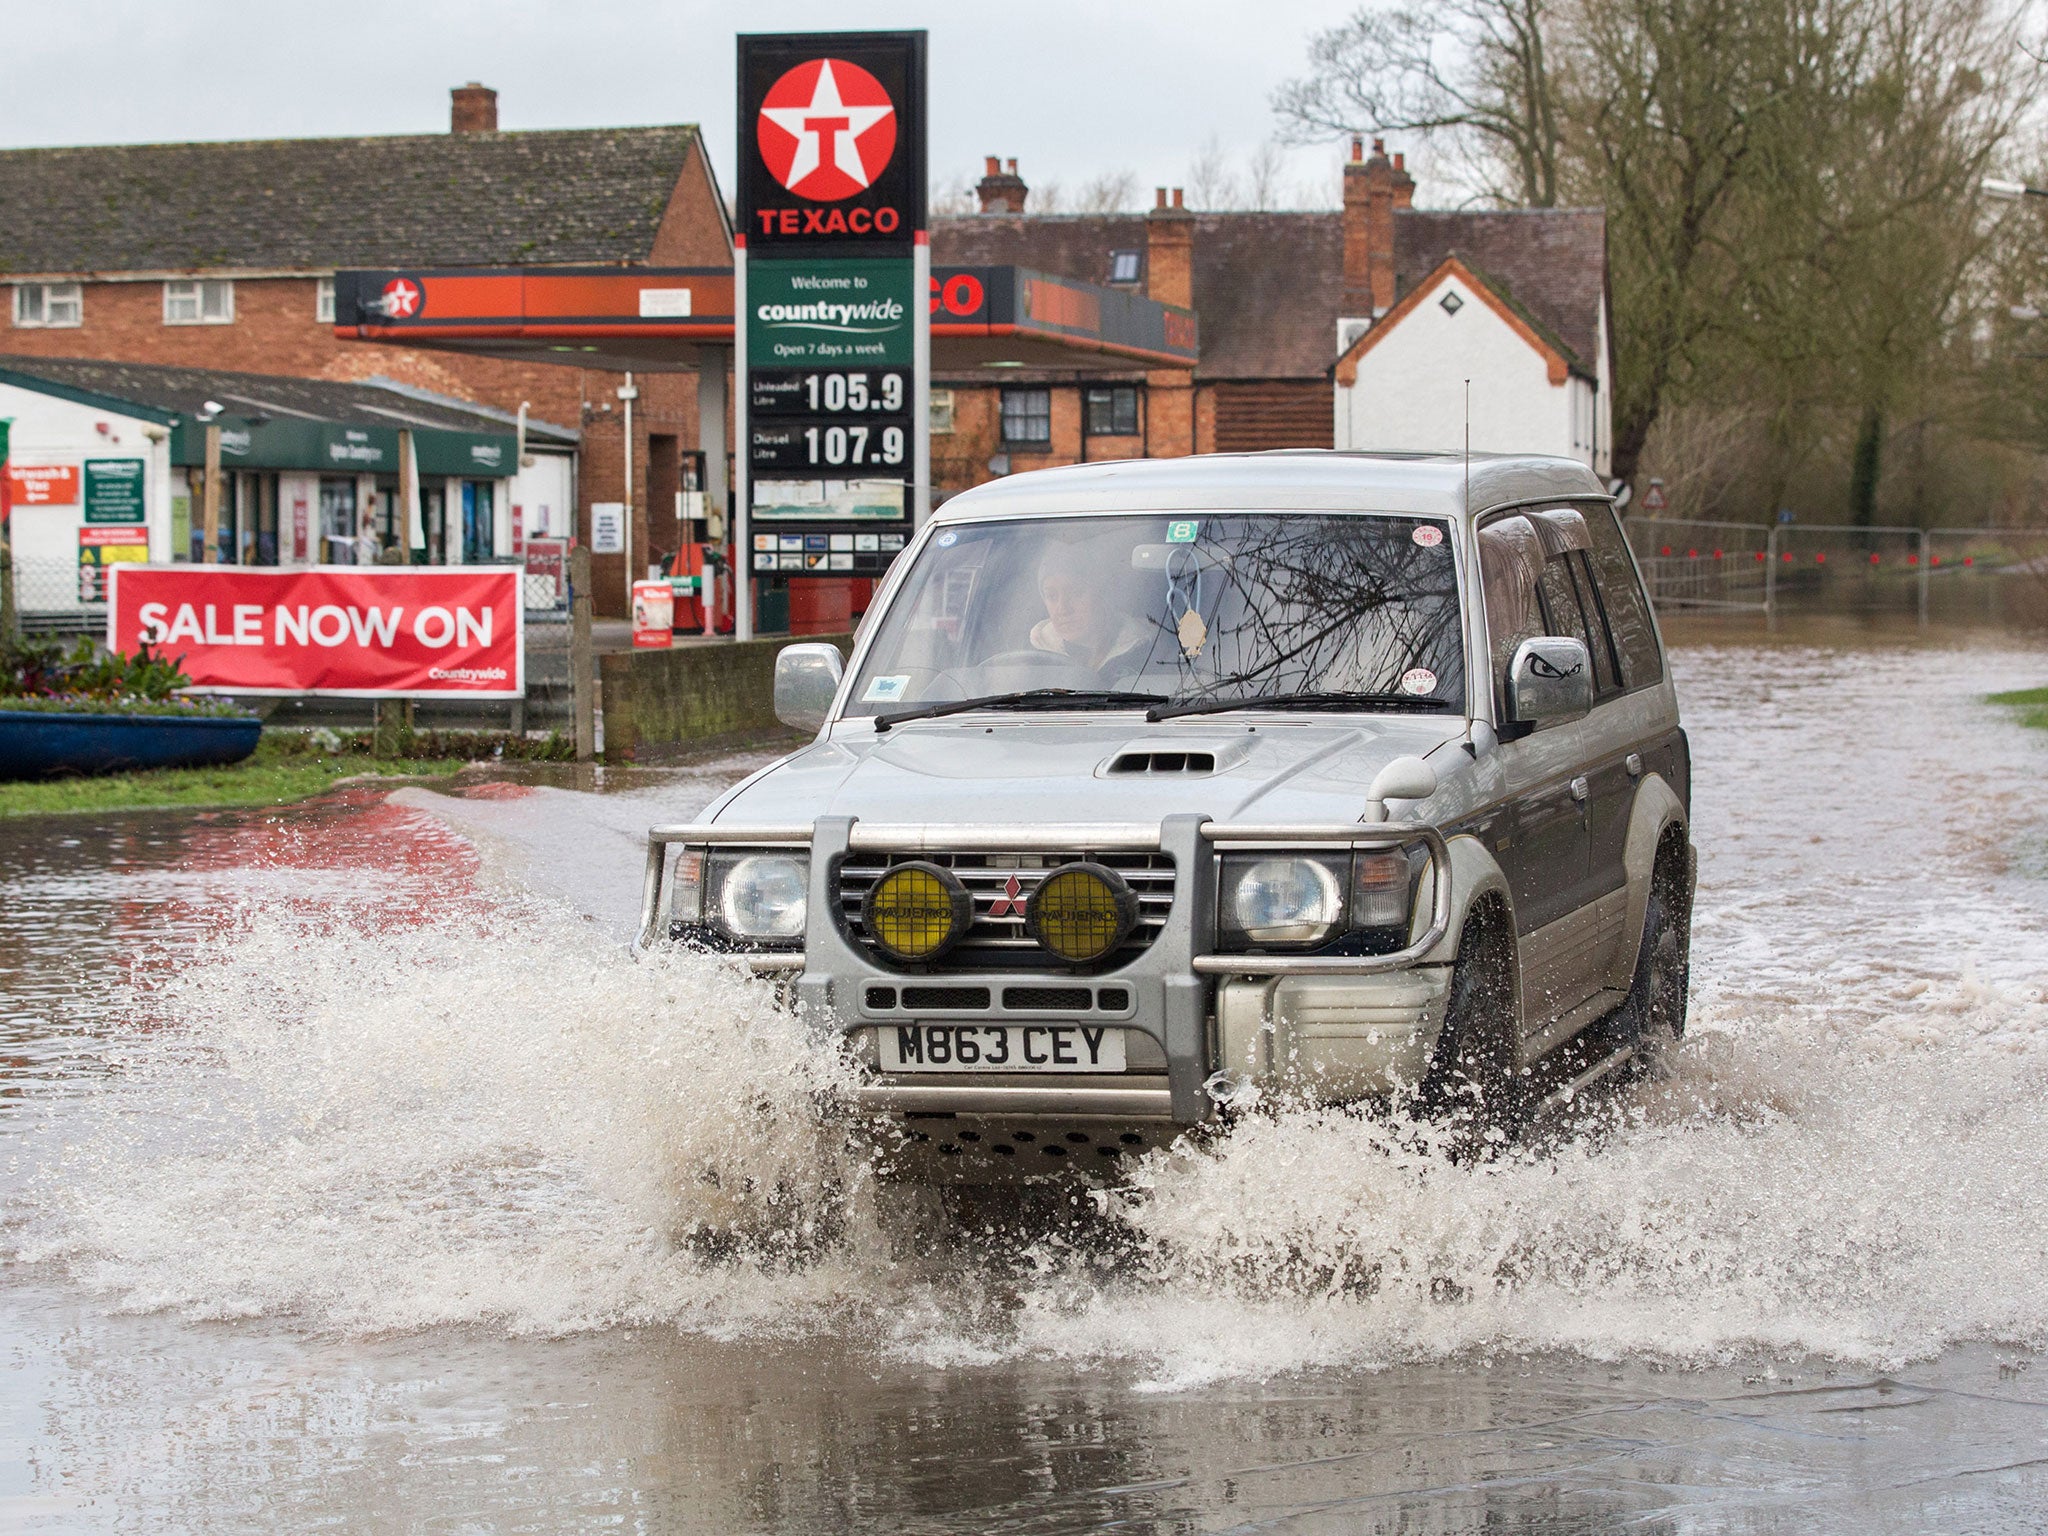 A 4x4 vehicle drives through flood water that has closed a road besides the River Severn in the town of Upton-upon-Severn